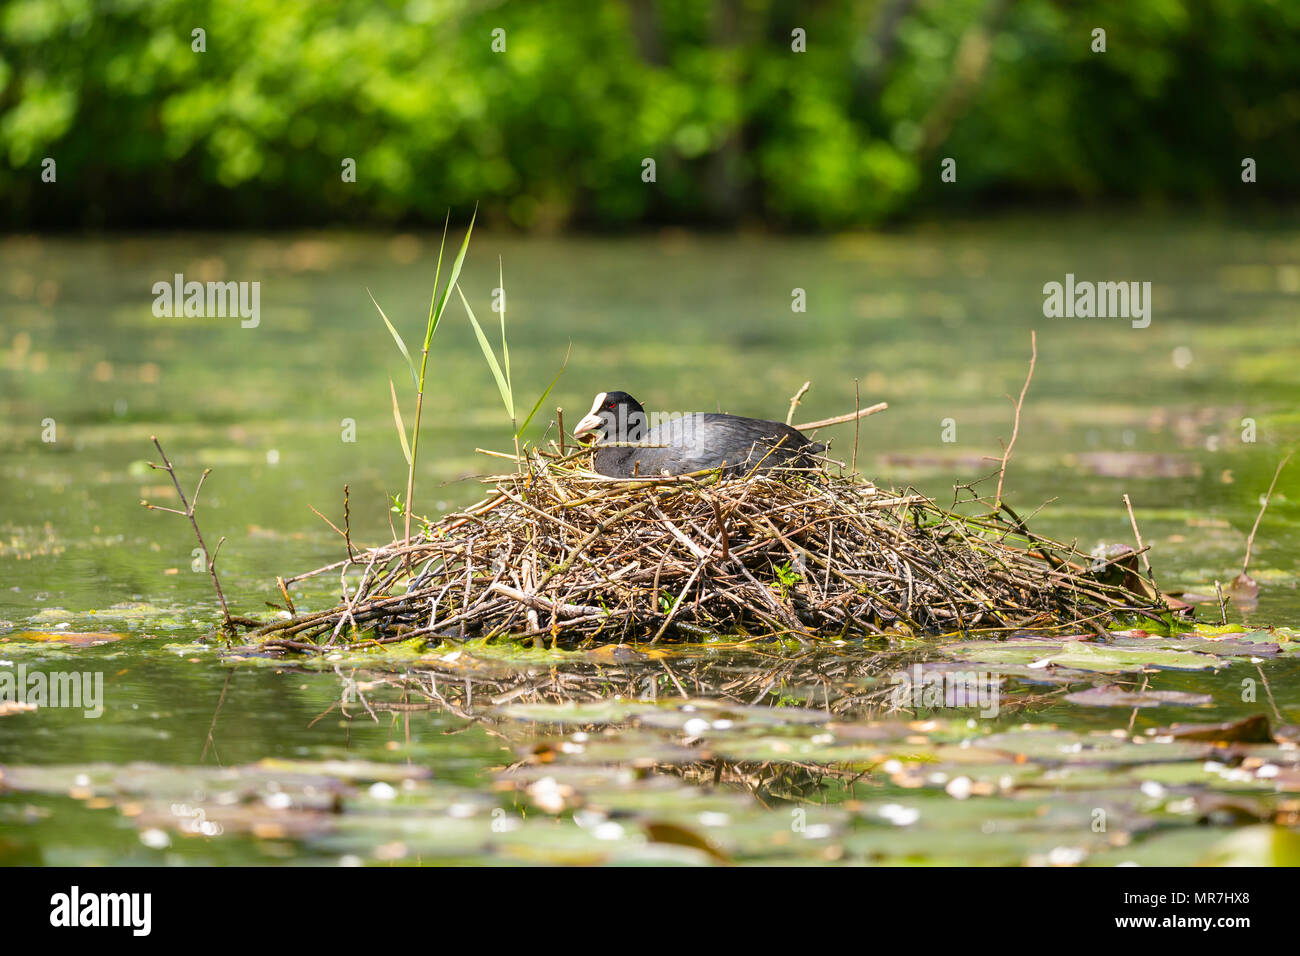 Closeup of a Eurasian coot (Fulica atra) sitting on a nest with eggs during Springtime season. Stock Photo